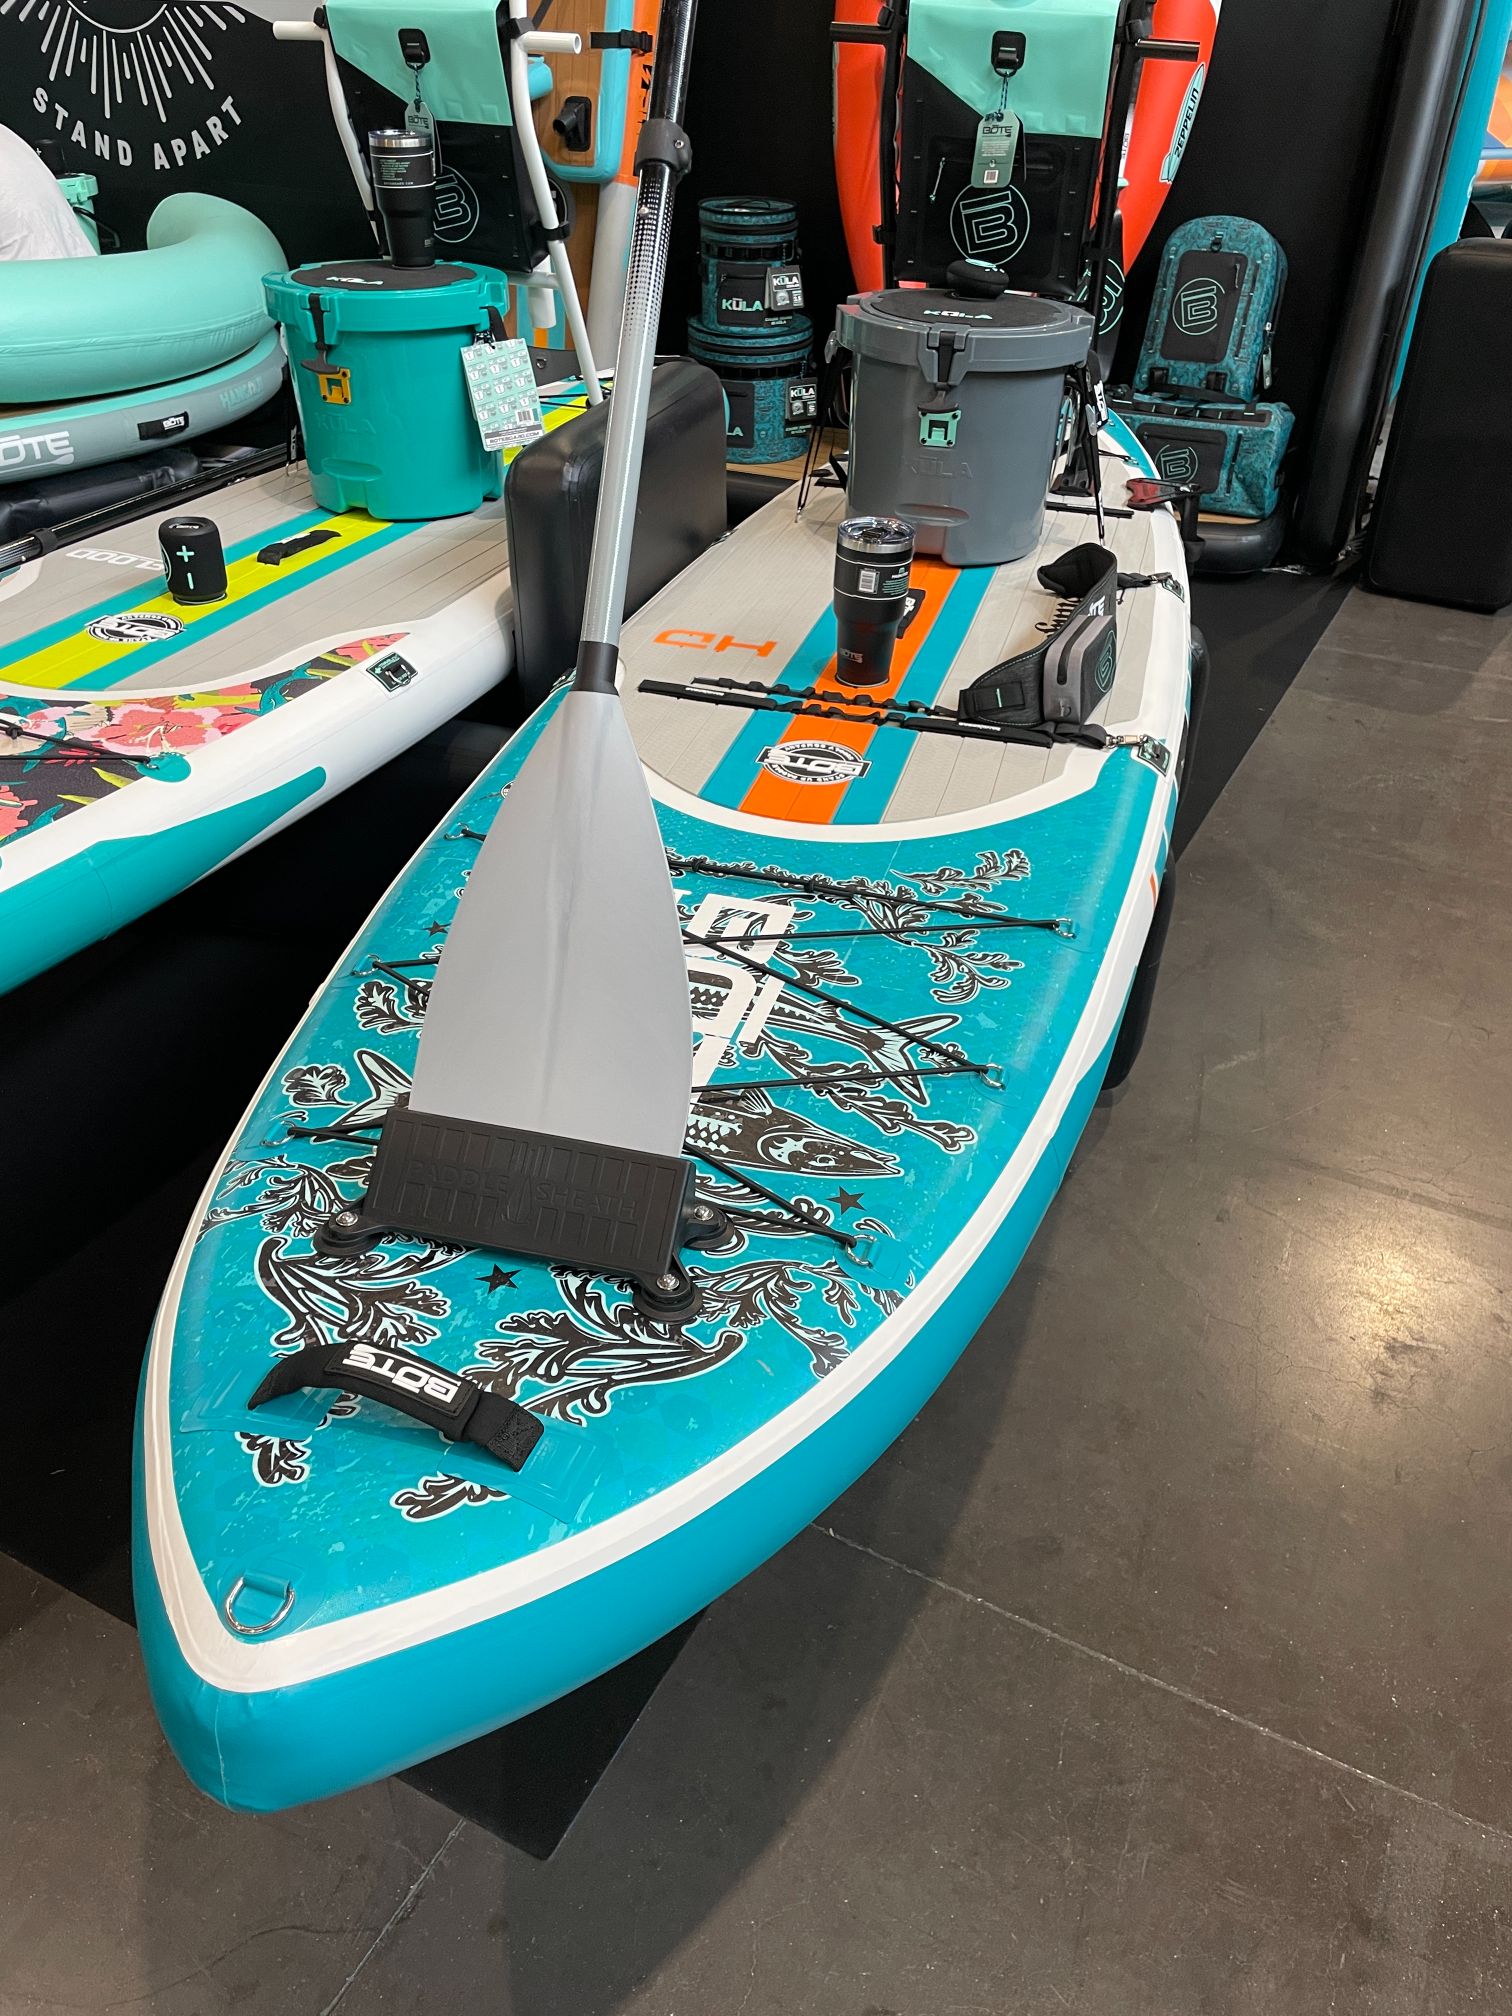 Bote’s HD Aero SUP with paddle storage mount unique to Bote JPG